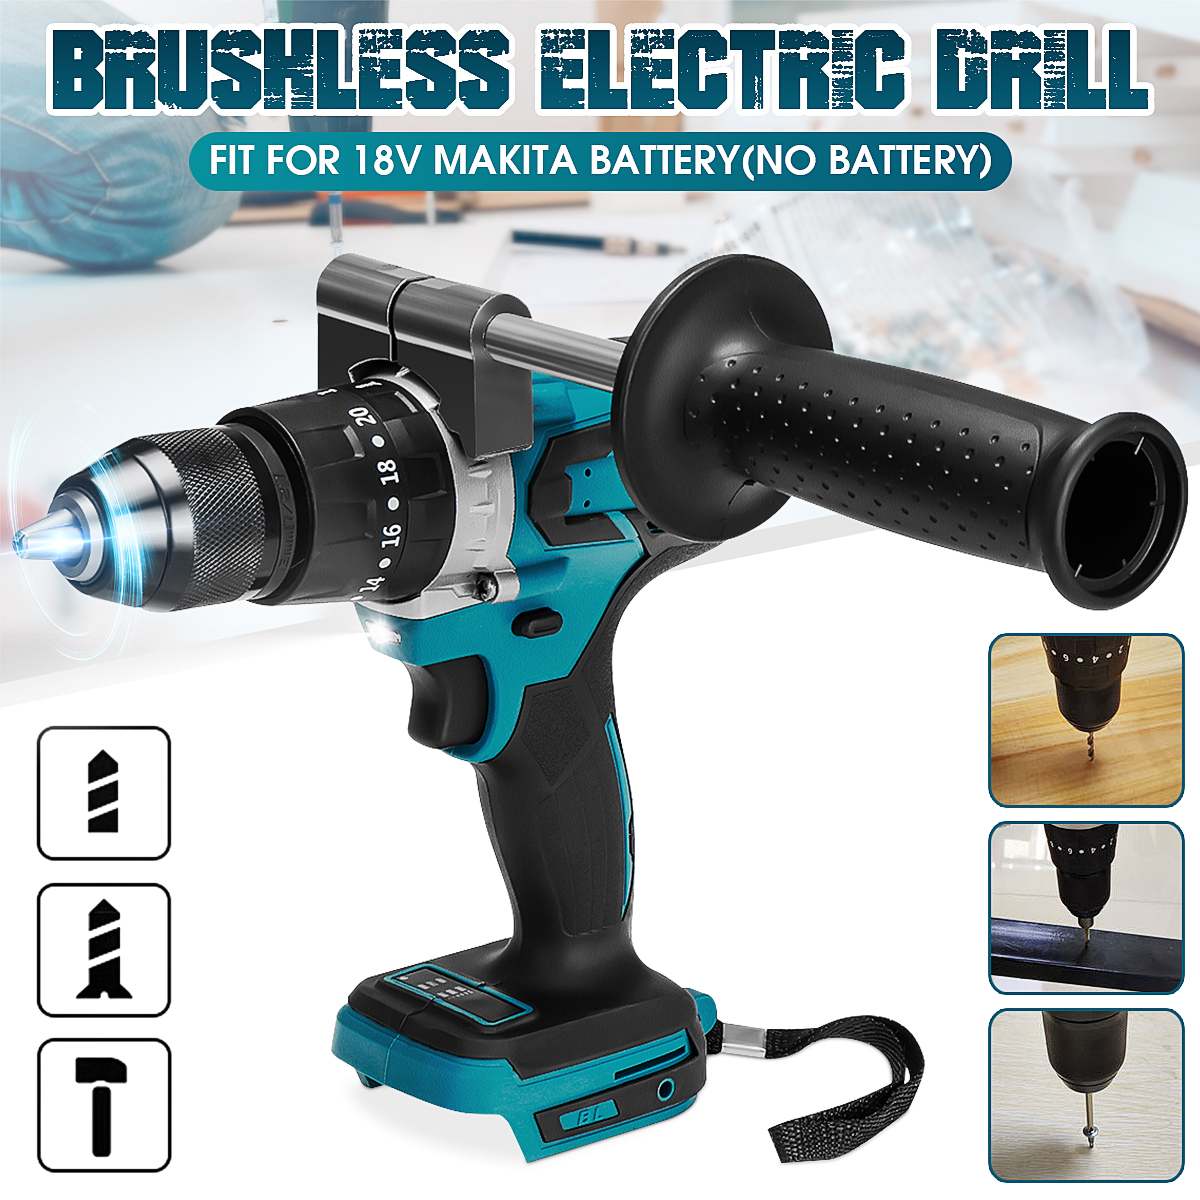 Brushless-Electric-Drill-20-Torque-520NM-Cordless-Screwdriver-13mm-Chuck-Power-Drill-for-Makita-18V--1801609-1